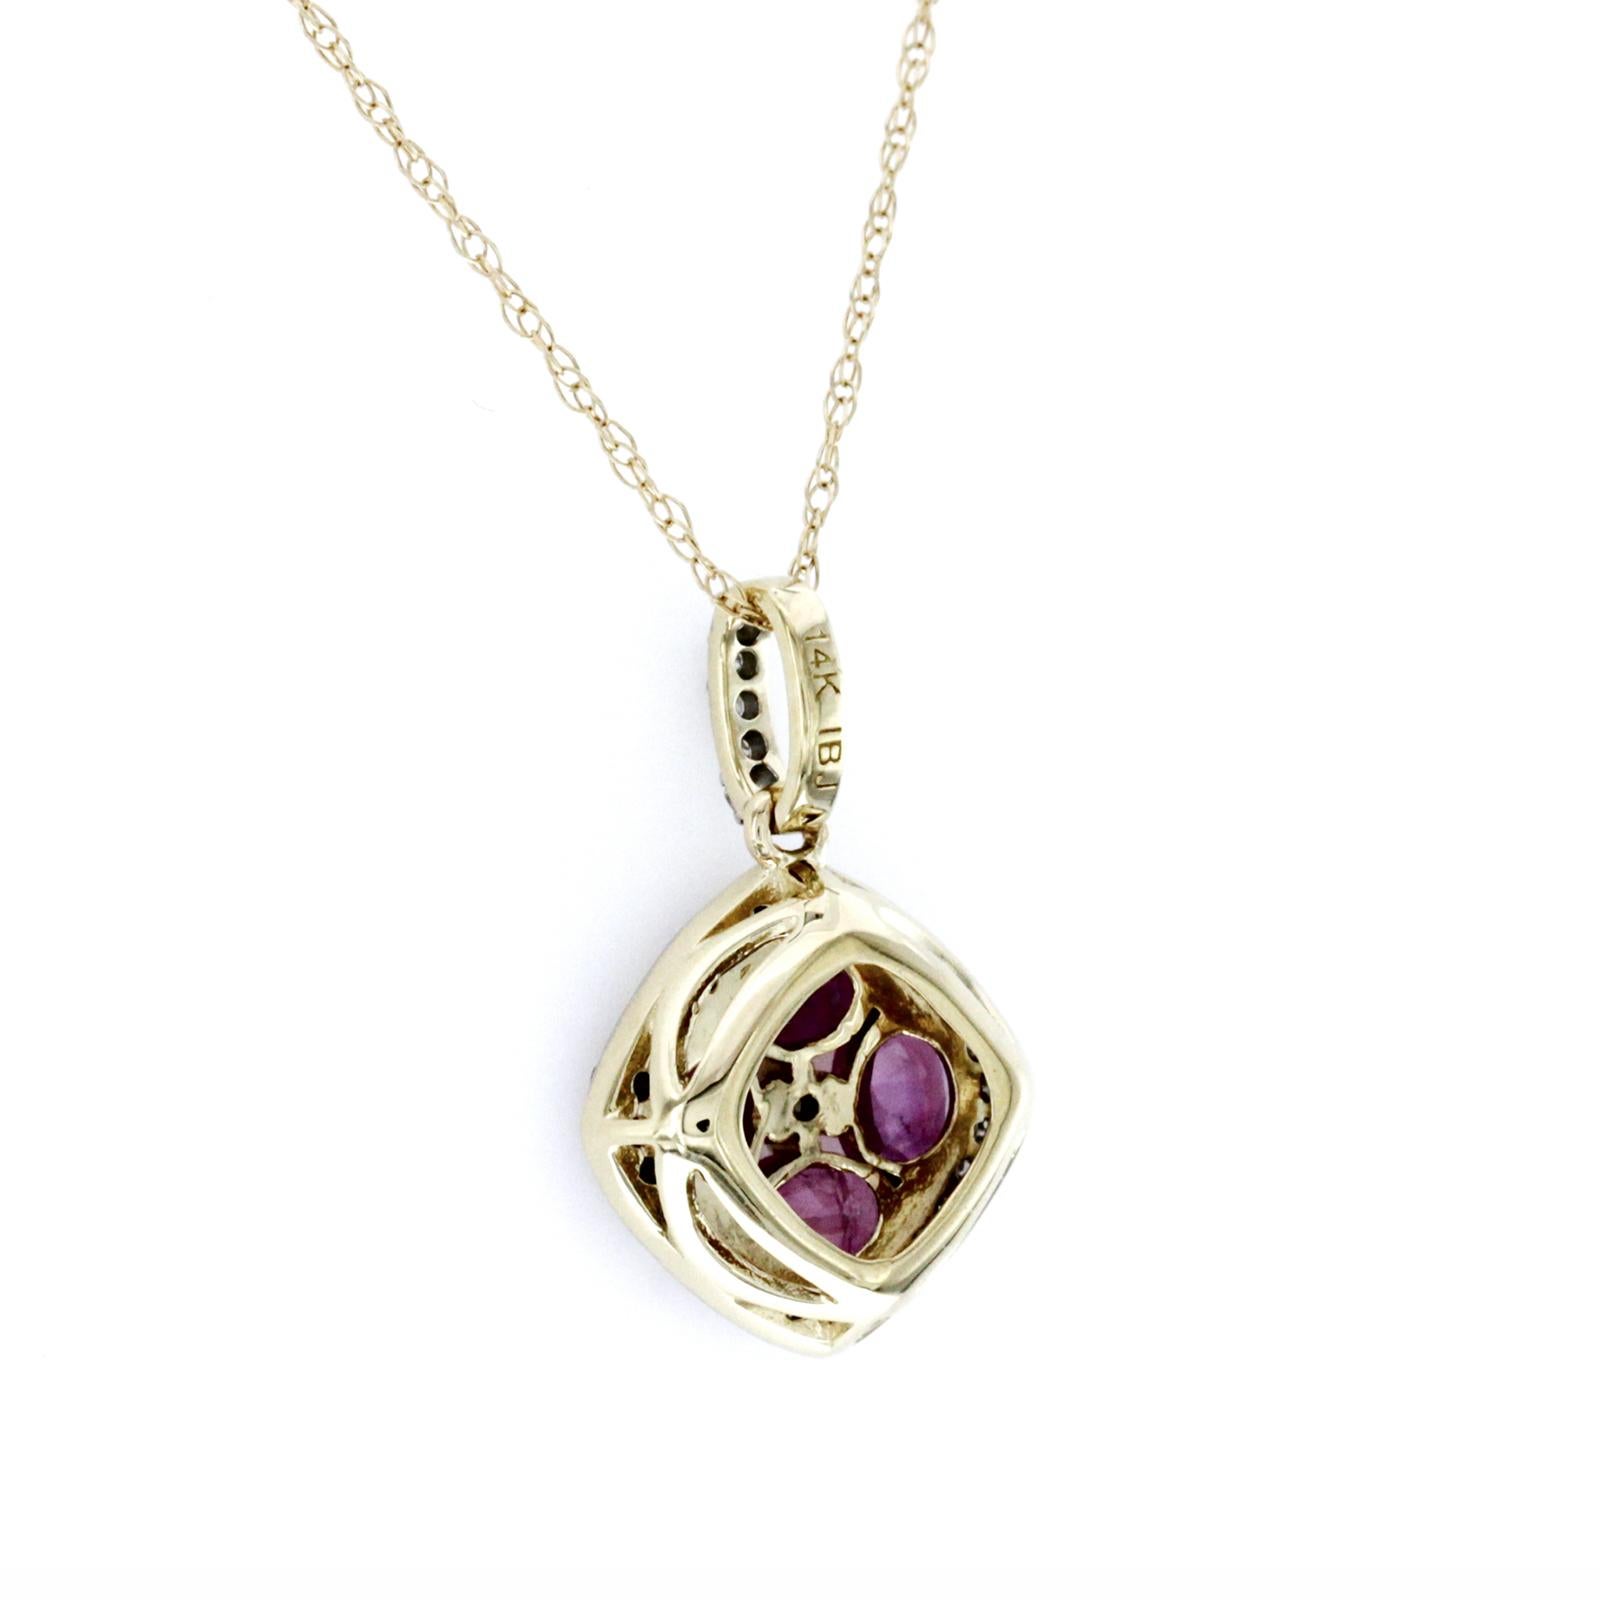 100% Authentic, 100% Customer Satisfaction

Pendant: 12 mm

Chain: 0.5mm

Size: 18 Inches

Metal: 14K Yellow Gold

Hallmarks: 14K

Total Weight: 1.6 Grams

Stone Type: 1.20 CT Natural Ruby &  Diamond 0.15 CT  H  SI1

Condition: New With Tag 